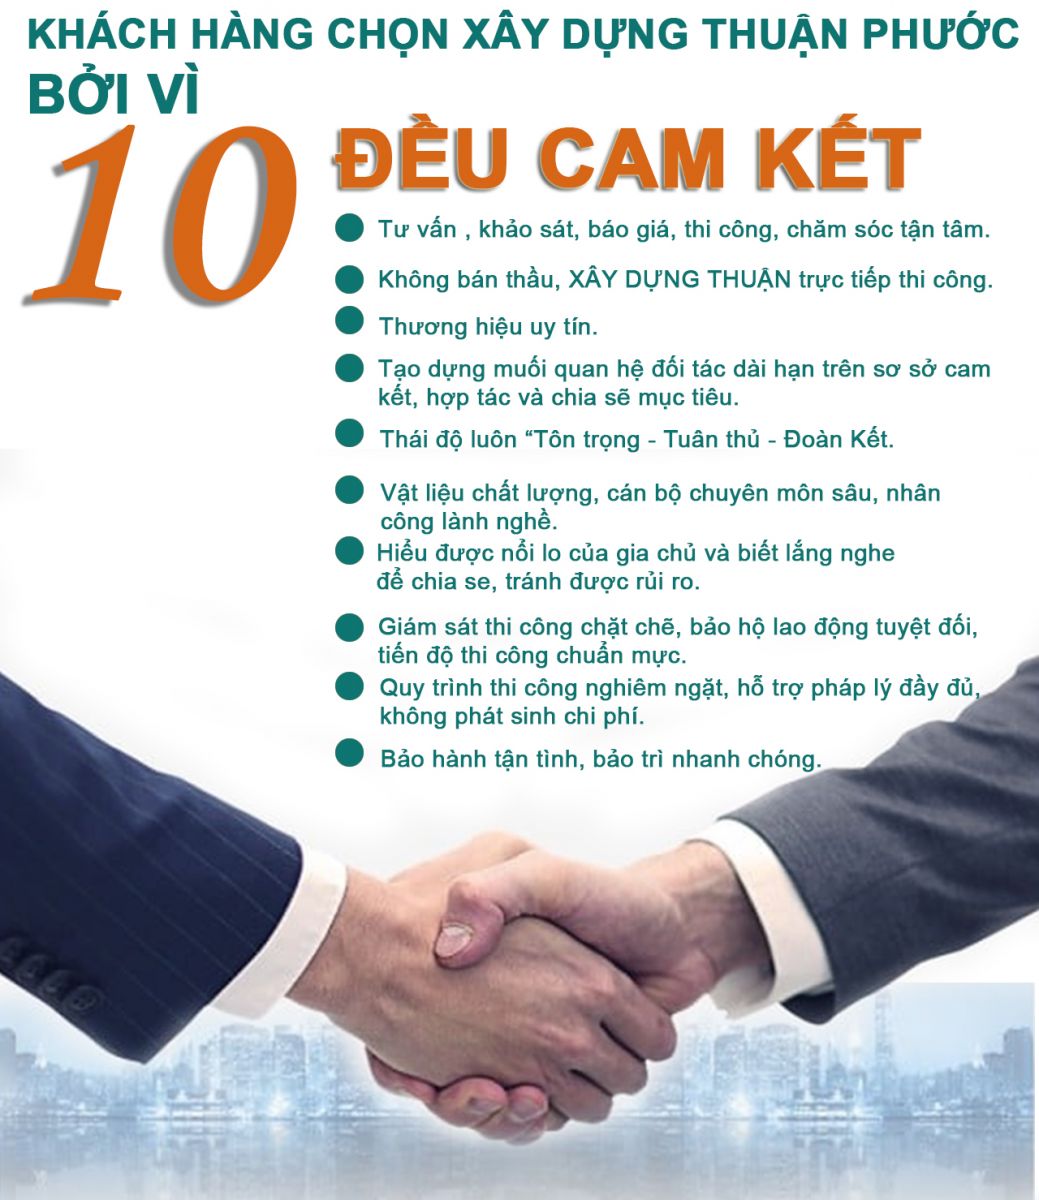 Cam kết xây dựng